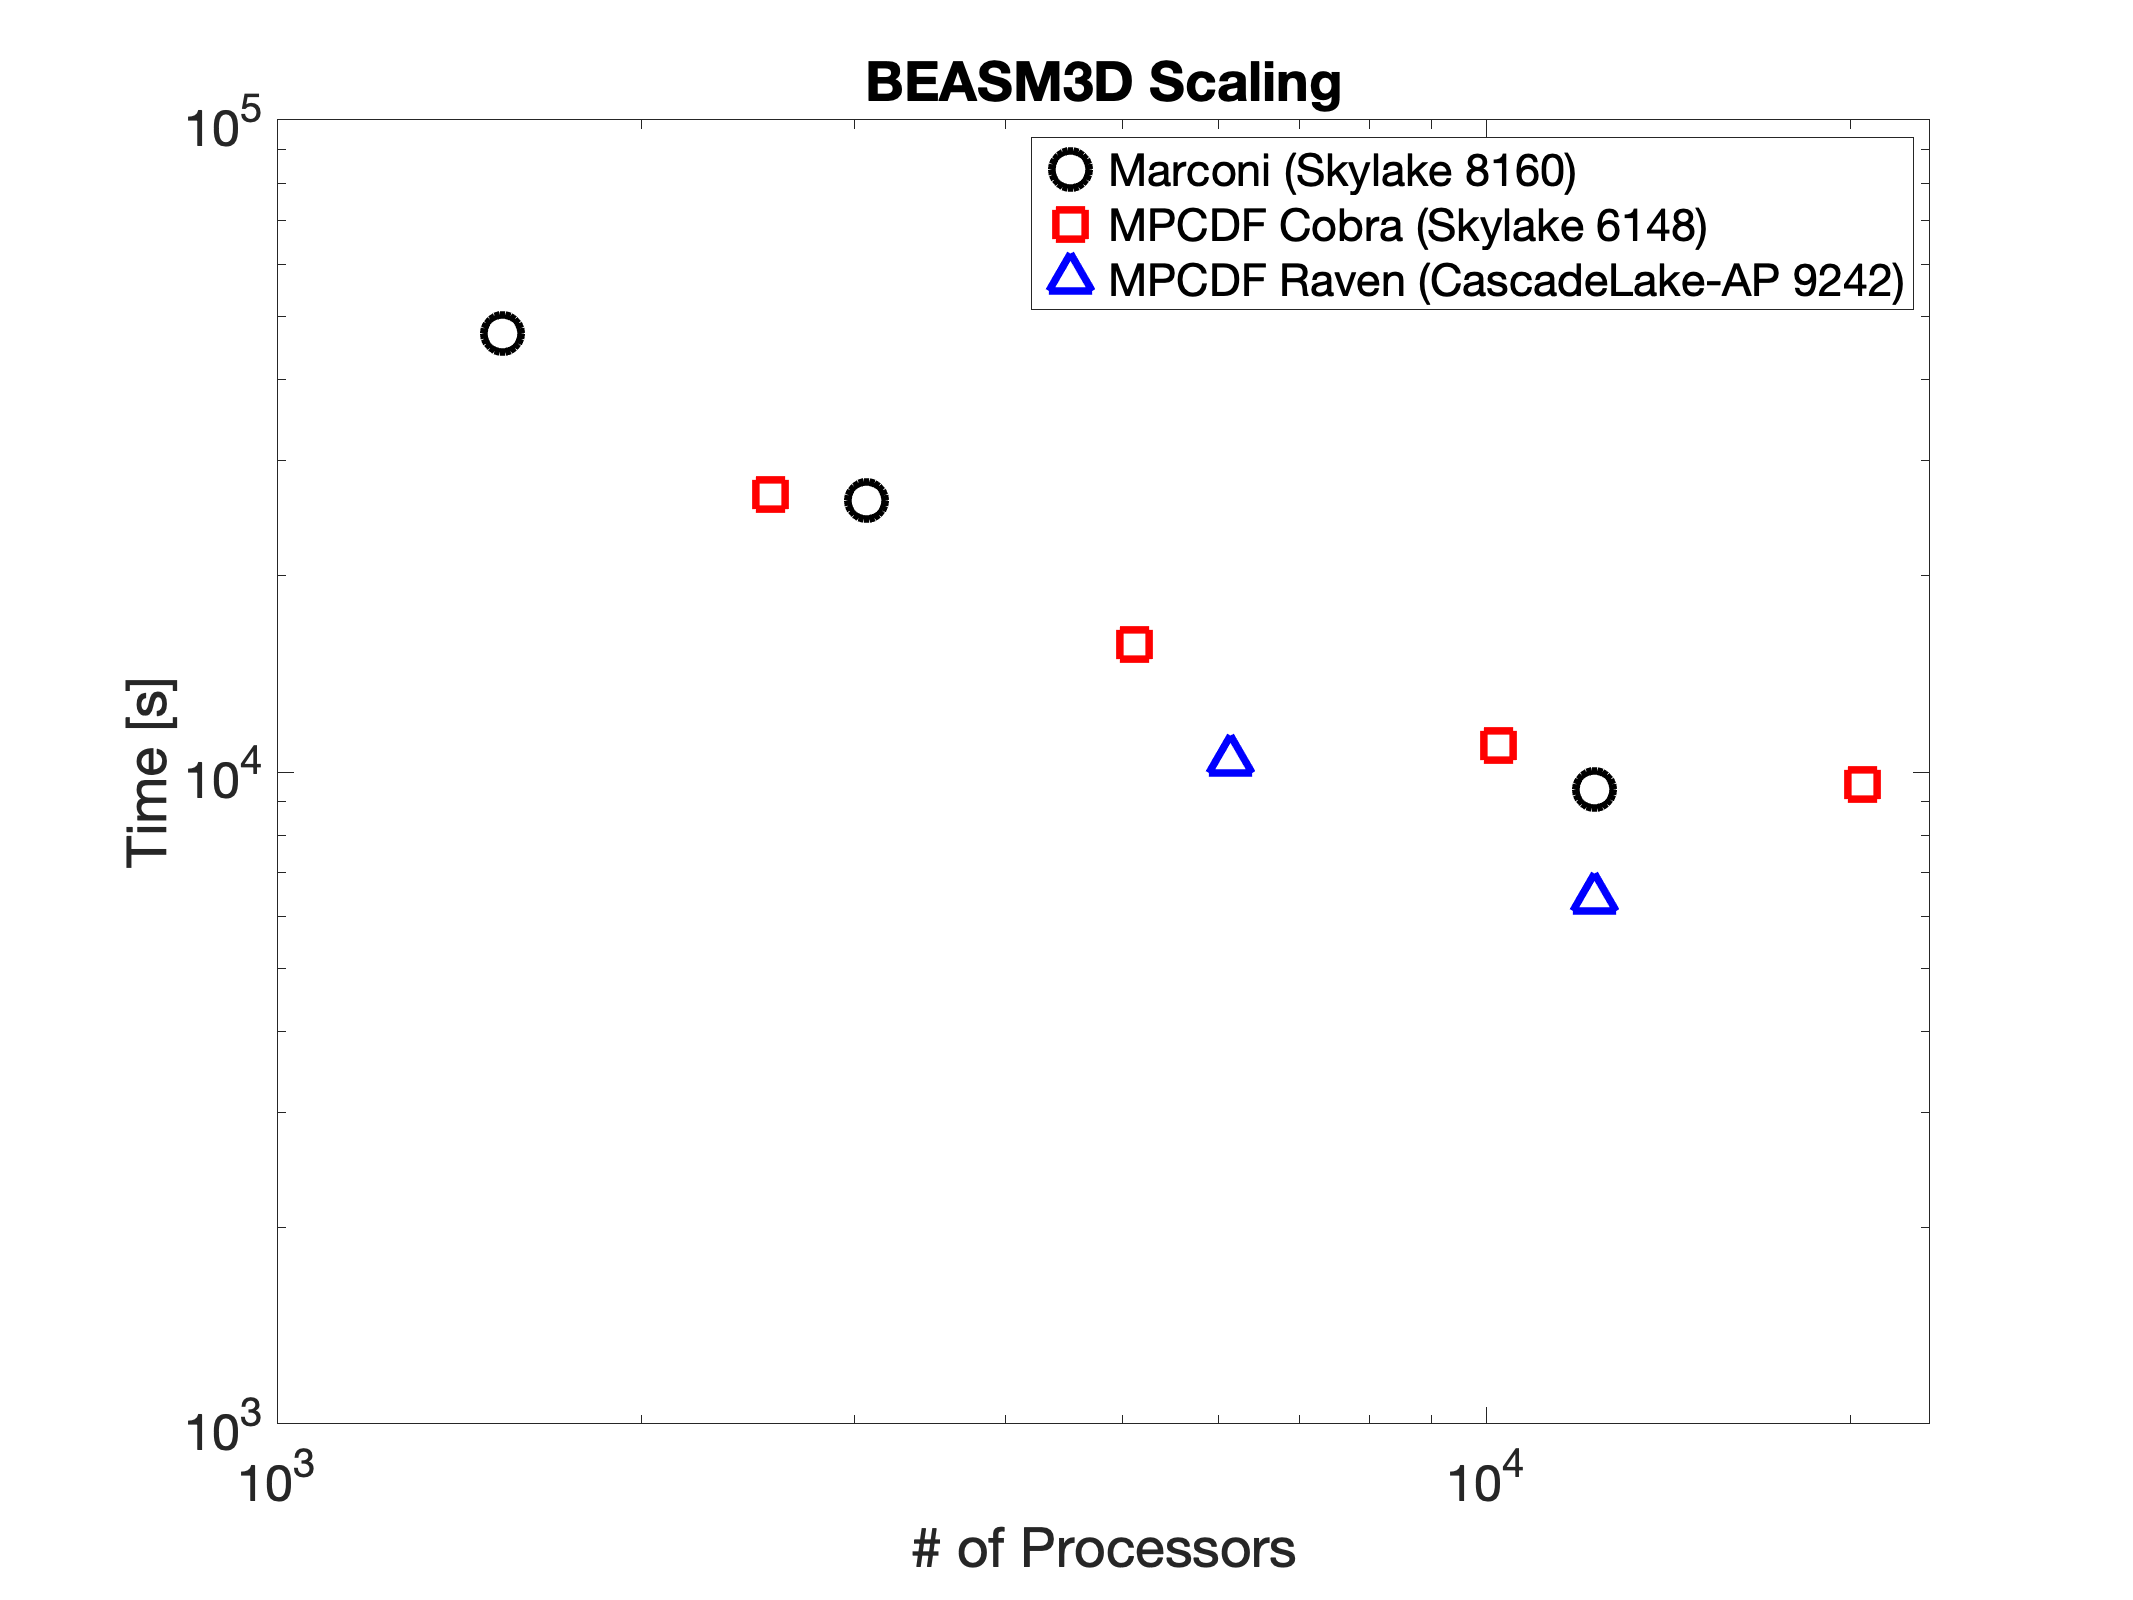 BEAMS3D Scaling on various HPC resources